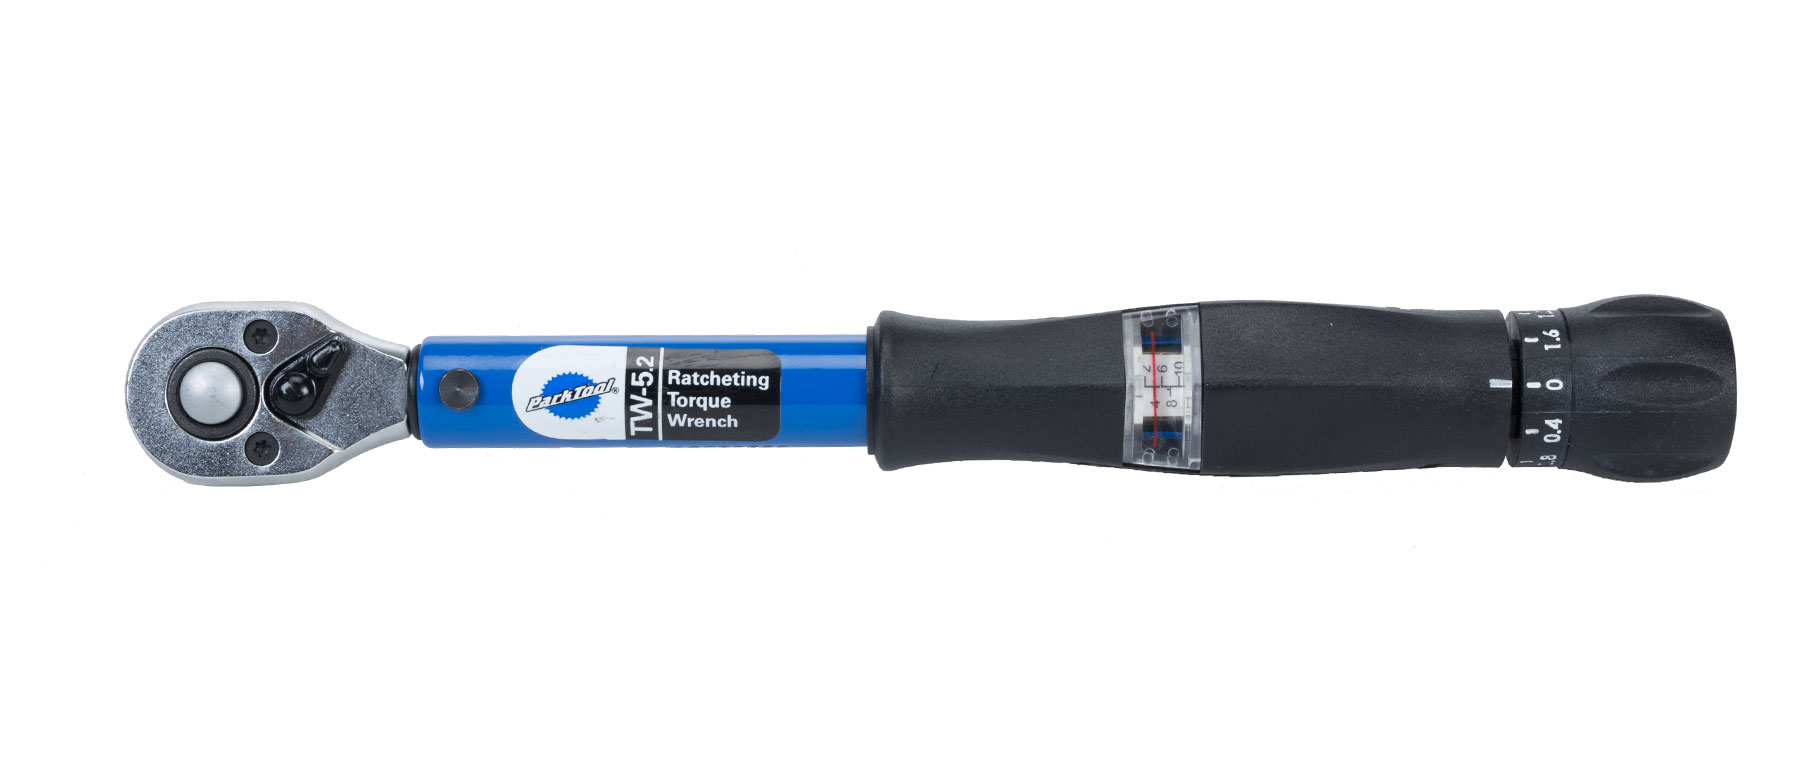 Park Tool TW-5.2 Ratcheting Click-Type Torque Wrench